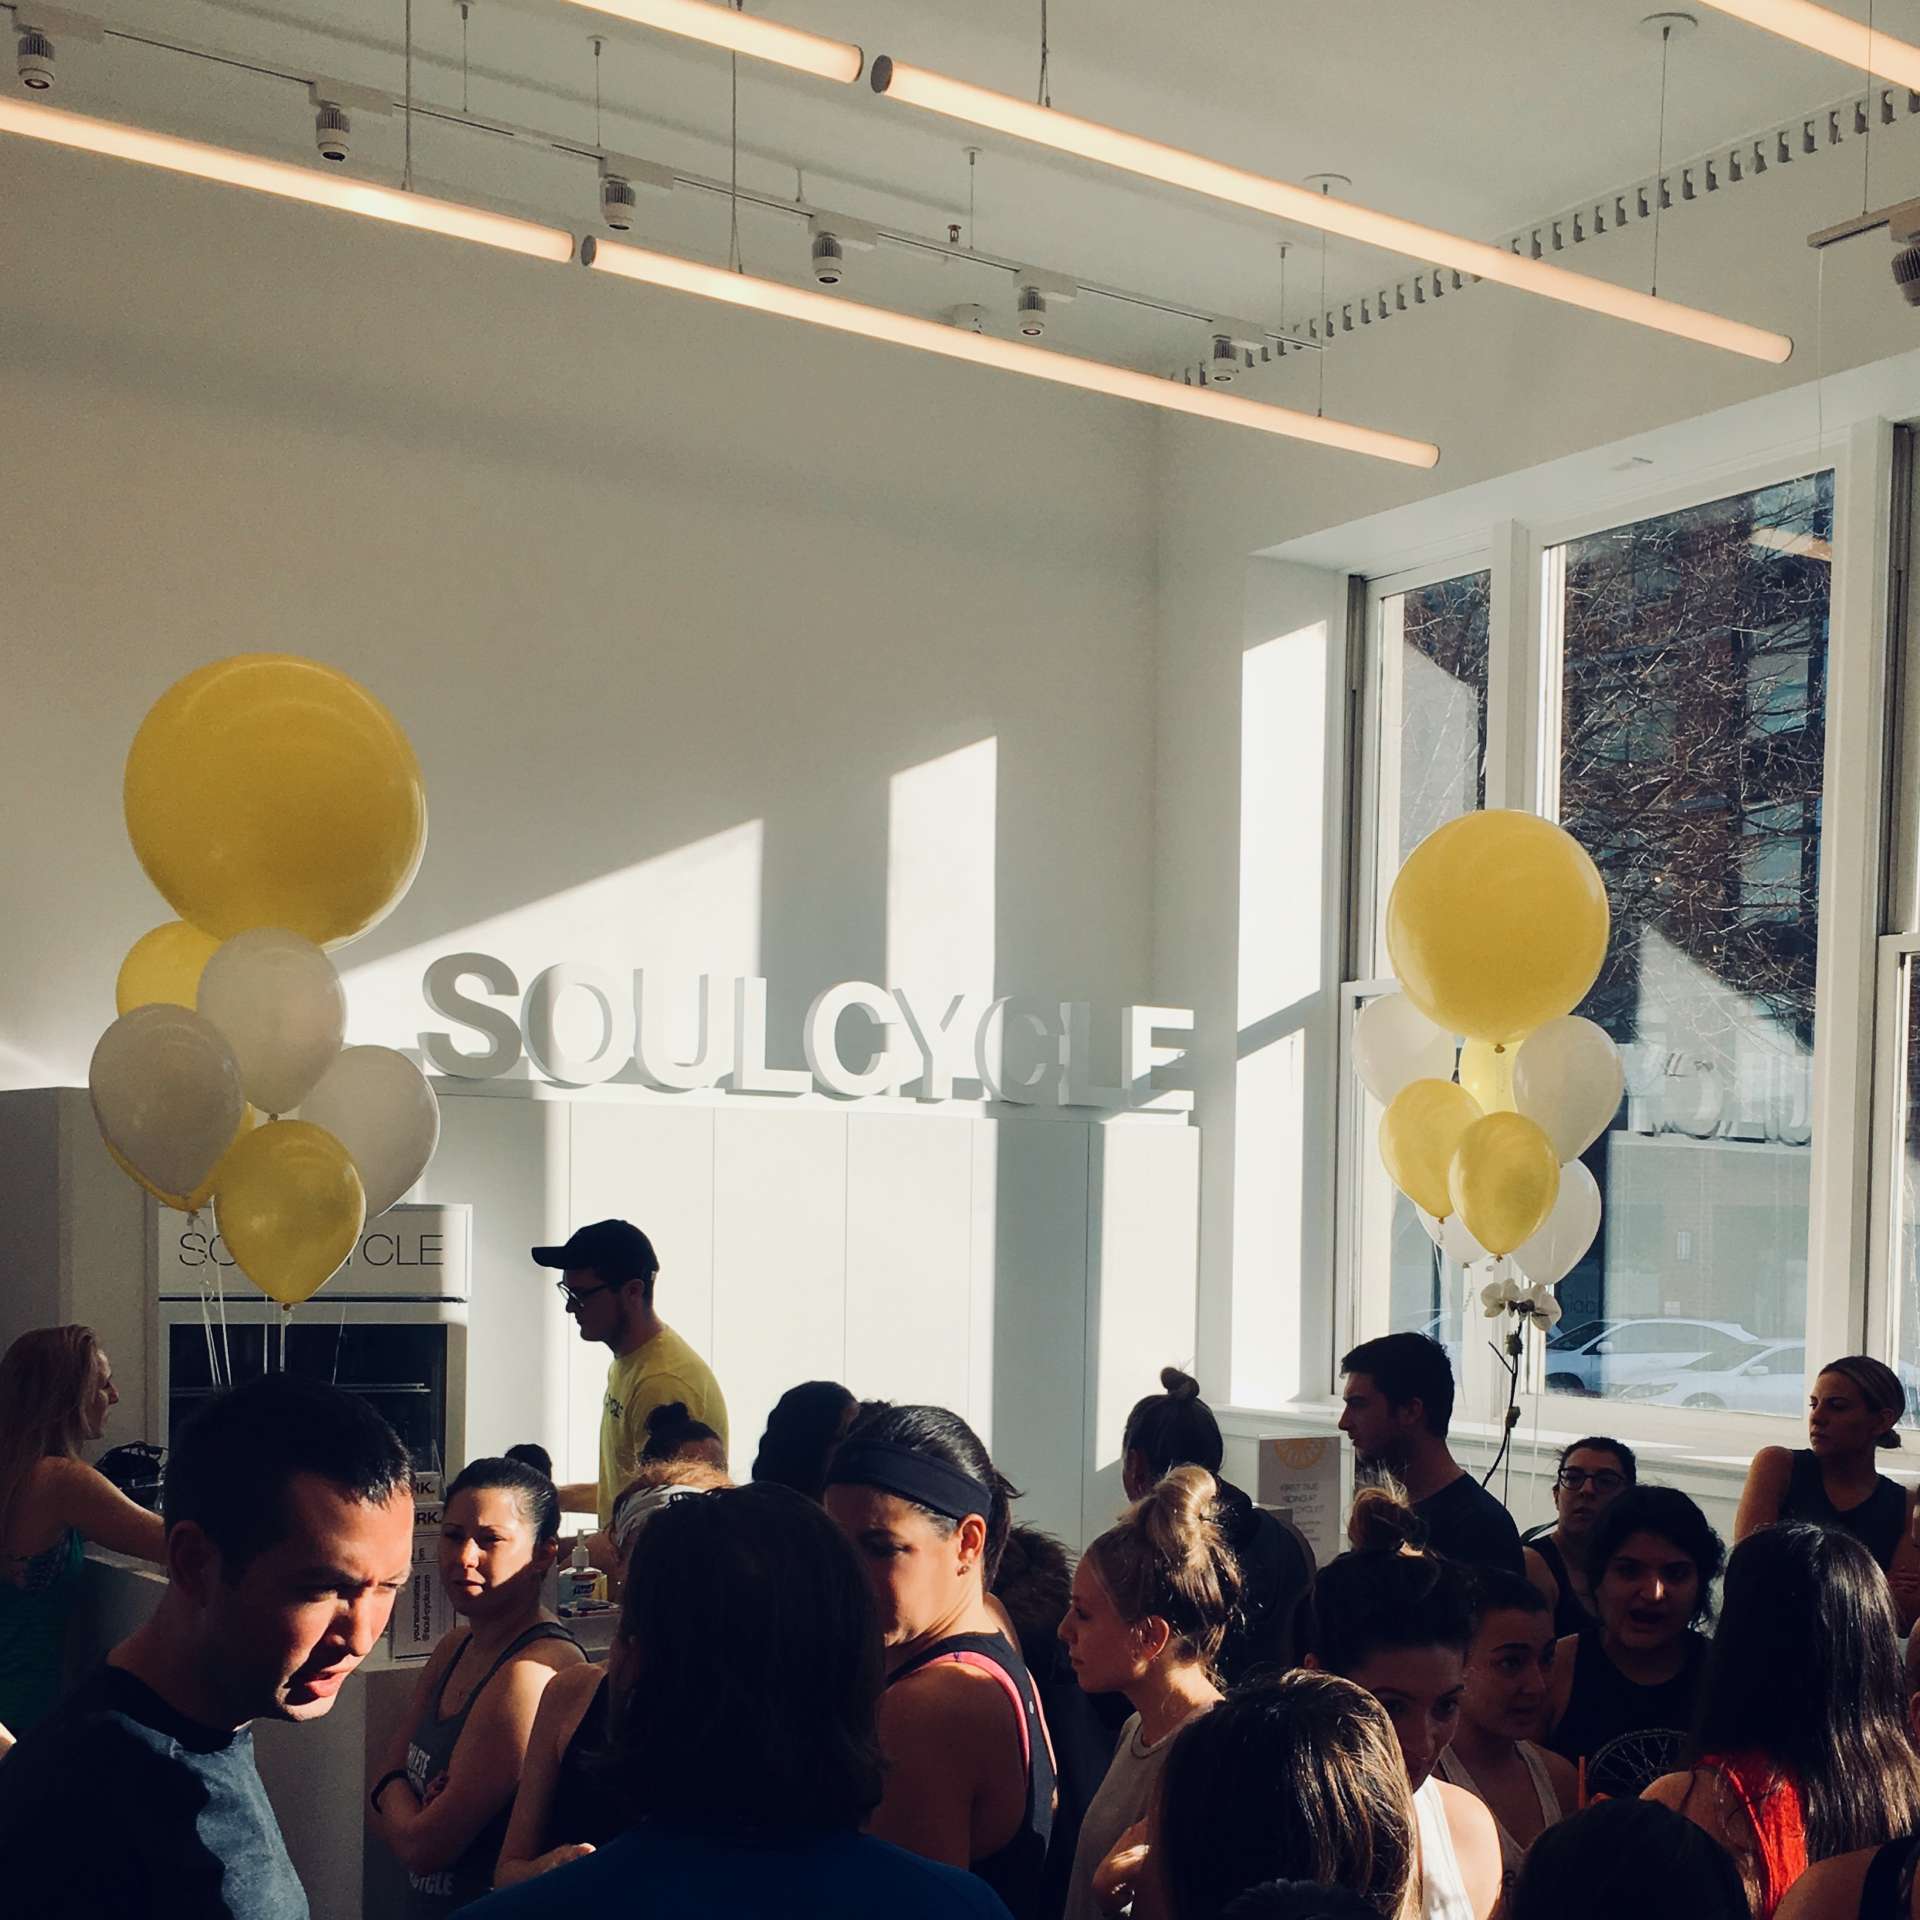 SoulCycle-Hoboken-HBKN-Fitness-Class-Opening-Day-Crowd-Lobby